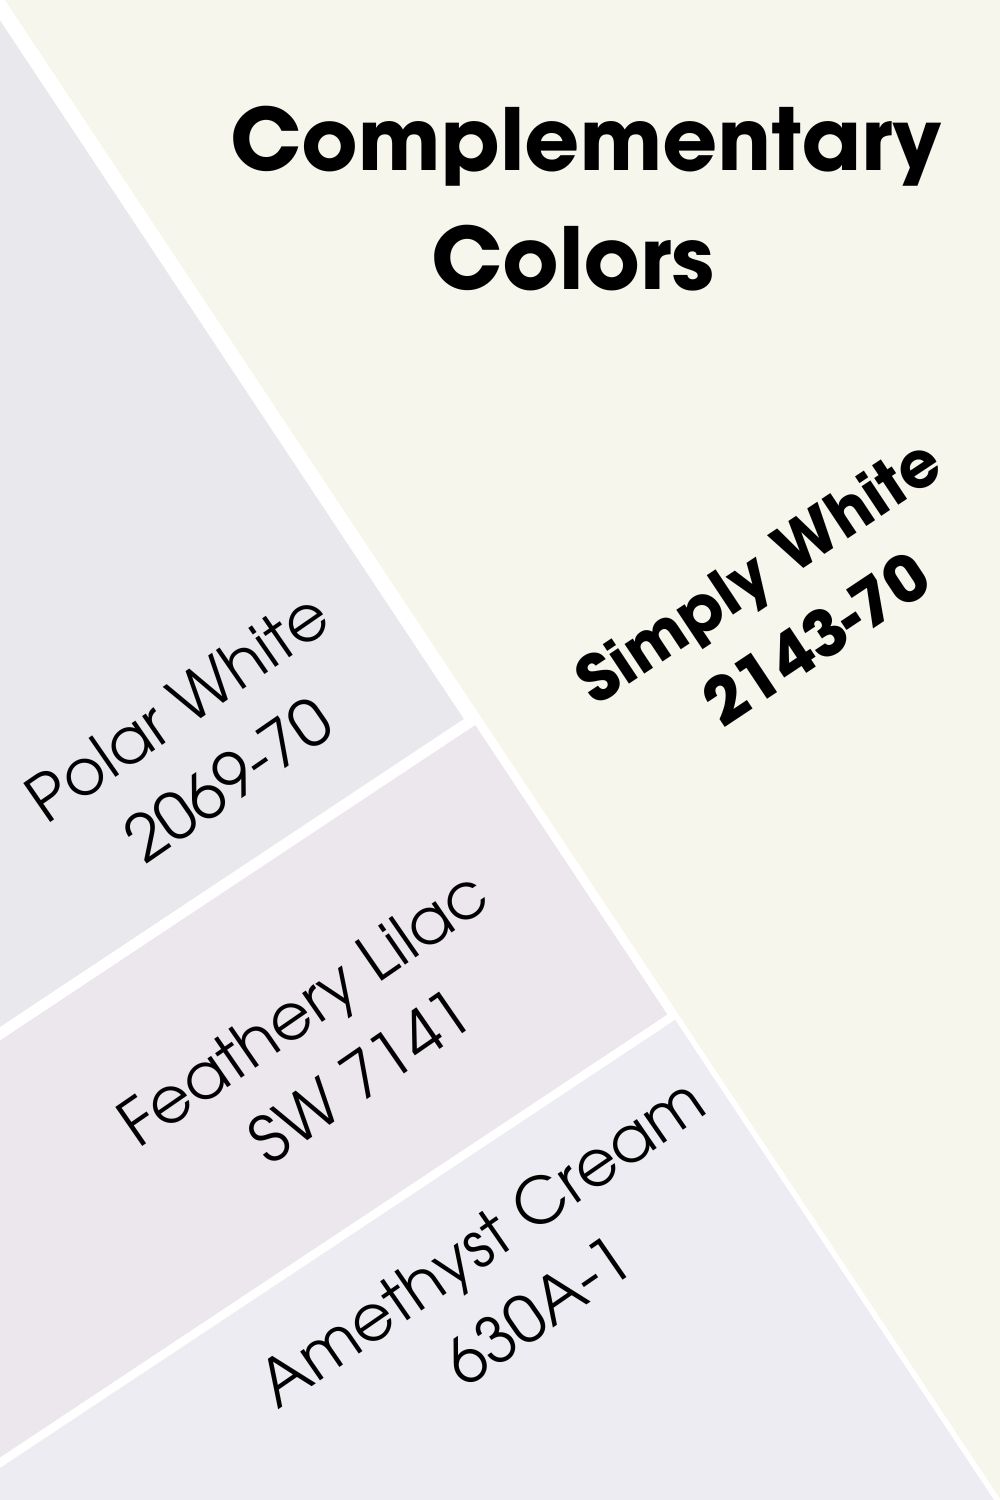 Simply White vs Complementary Colors